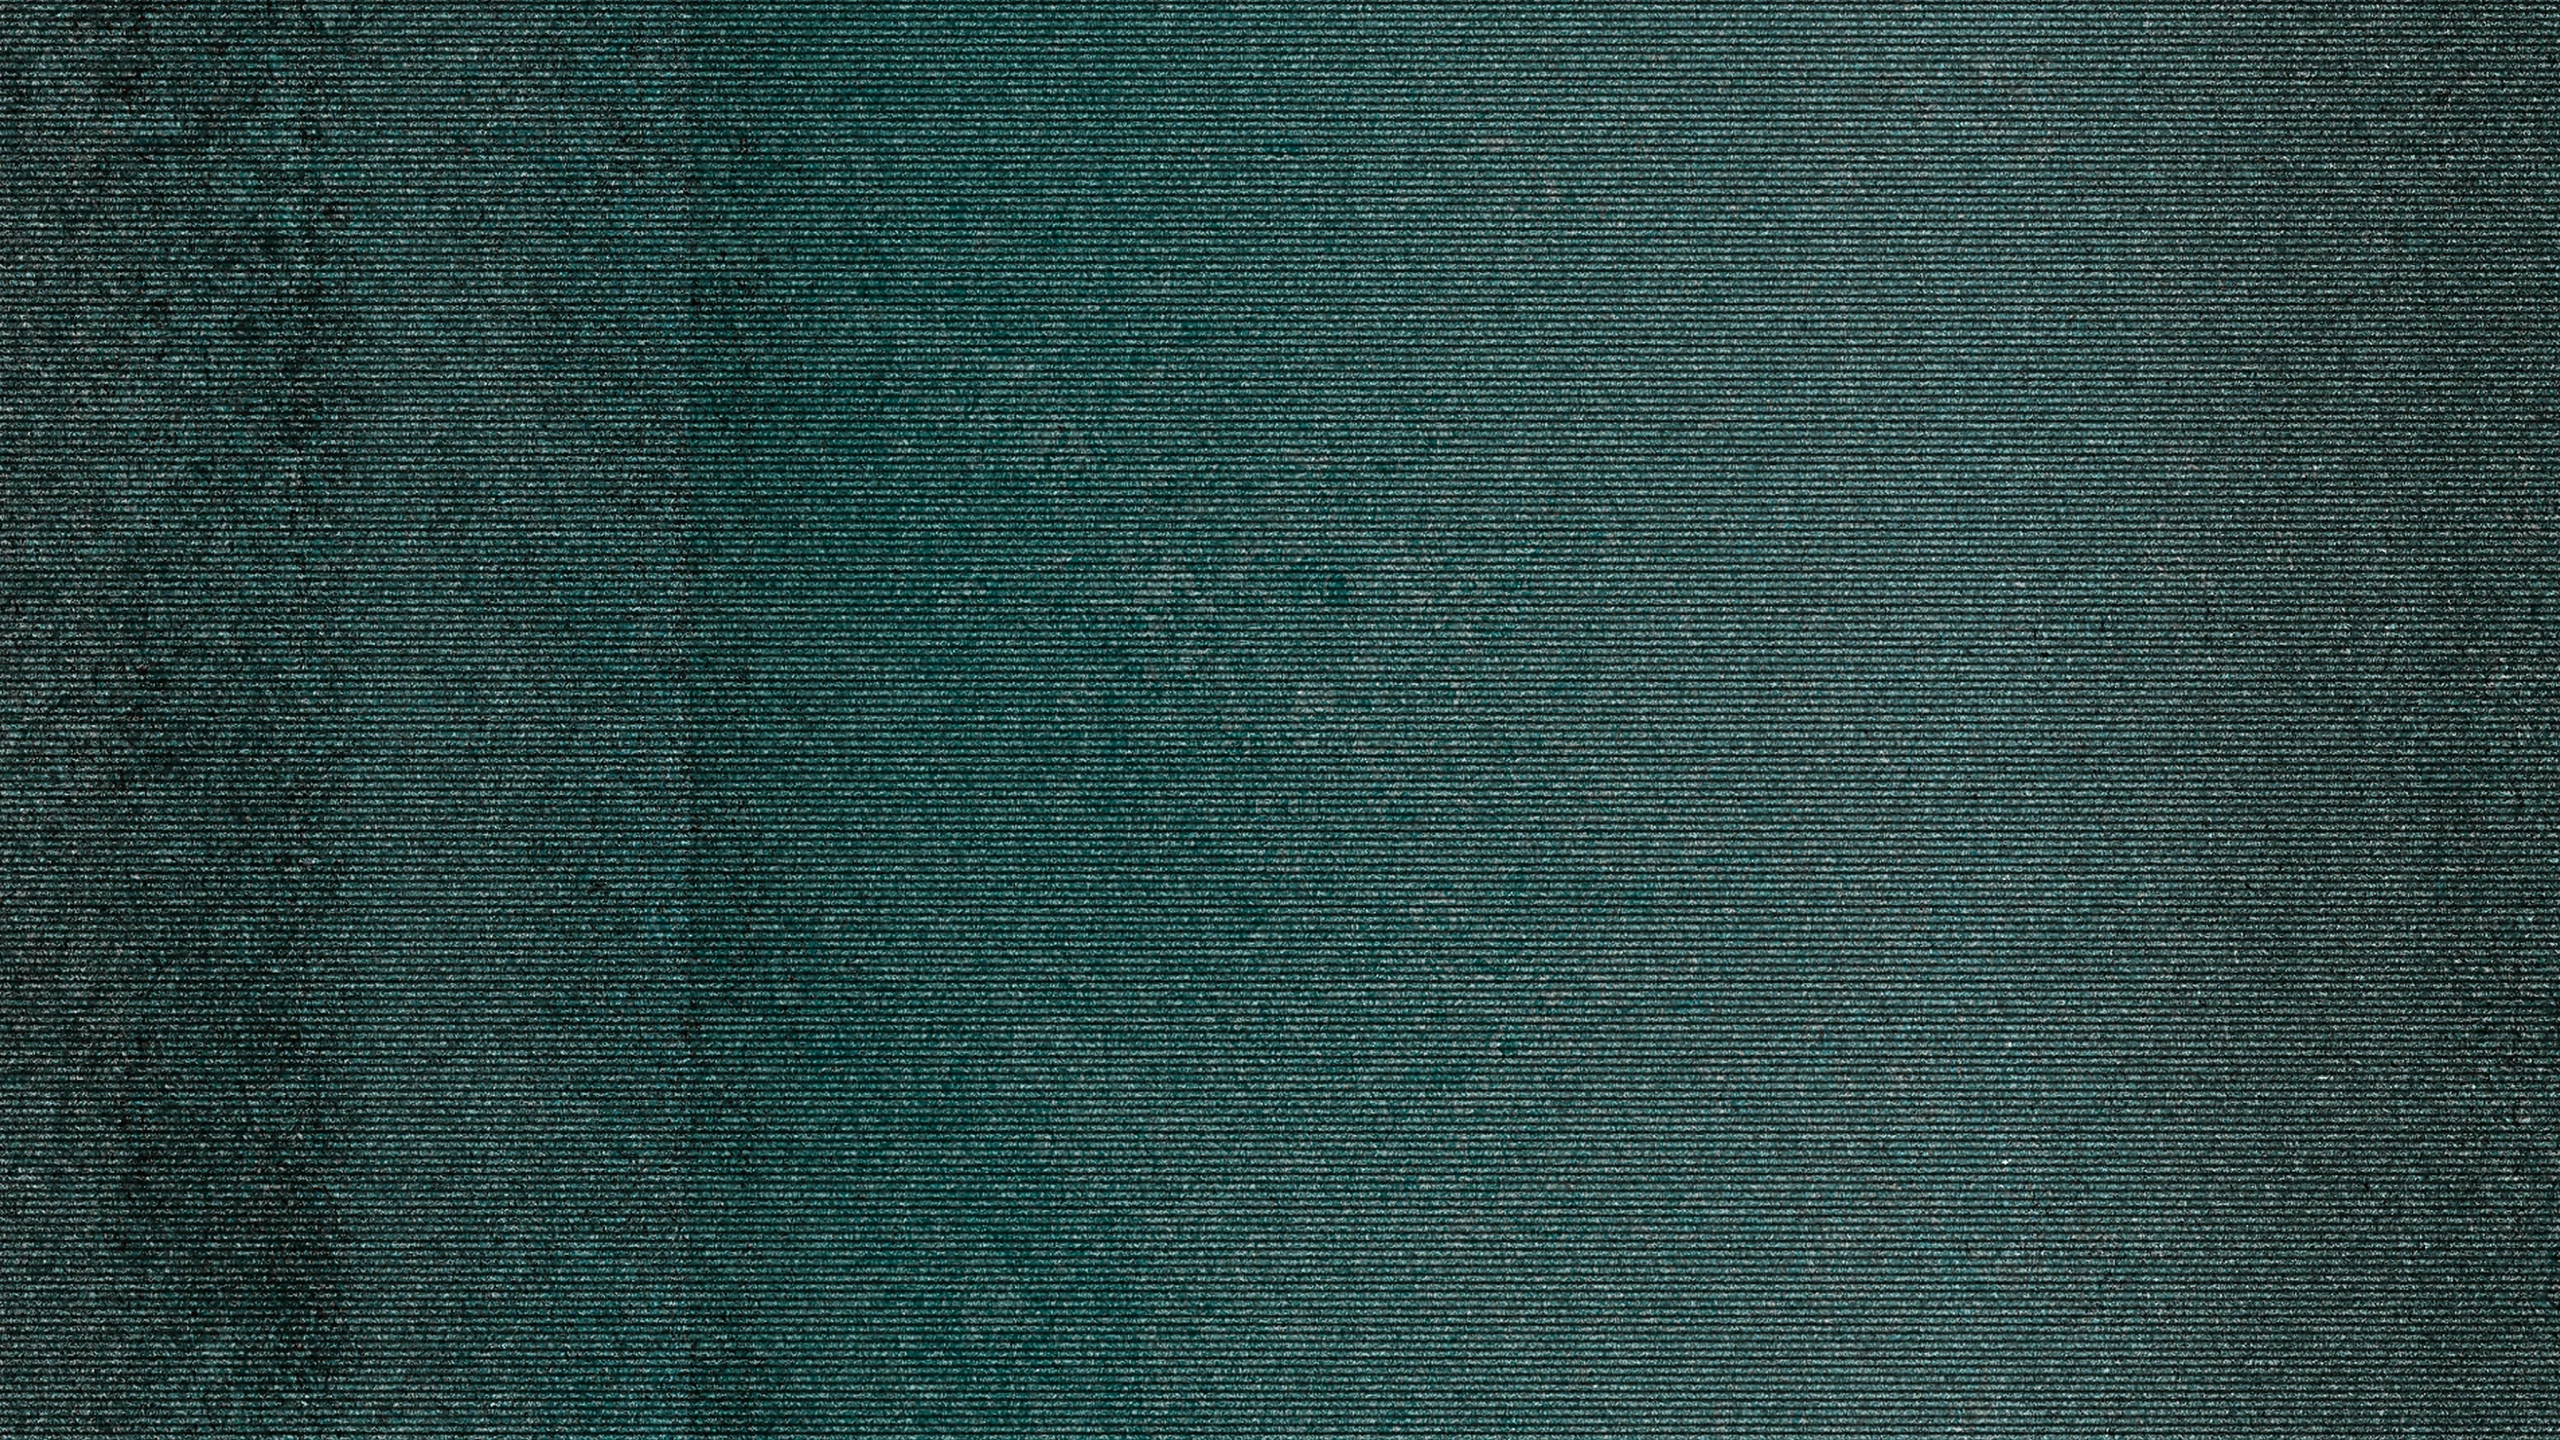 an image of black and green text texture